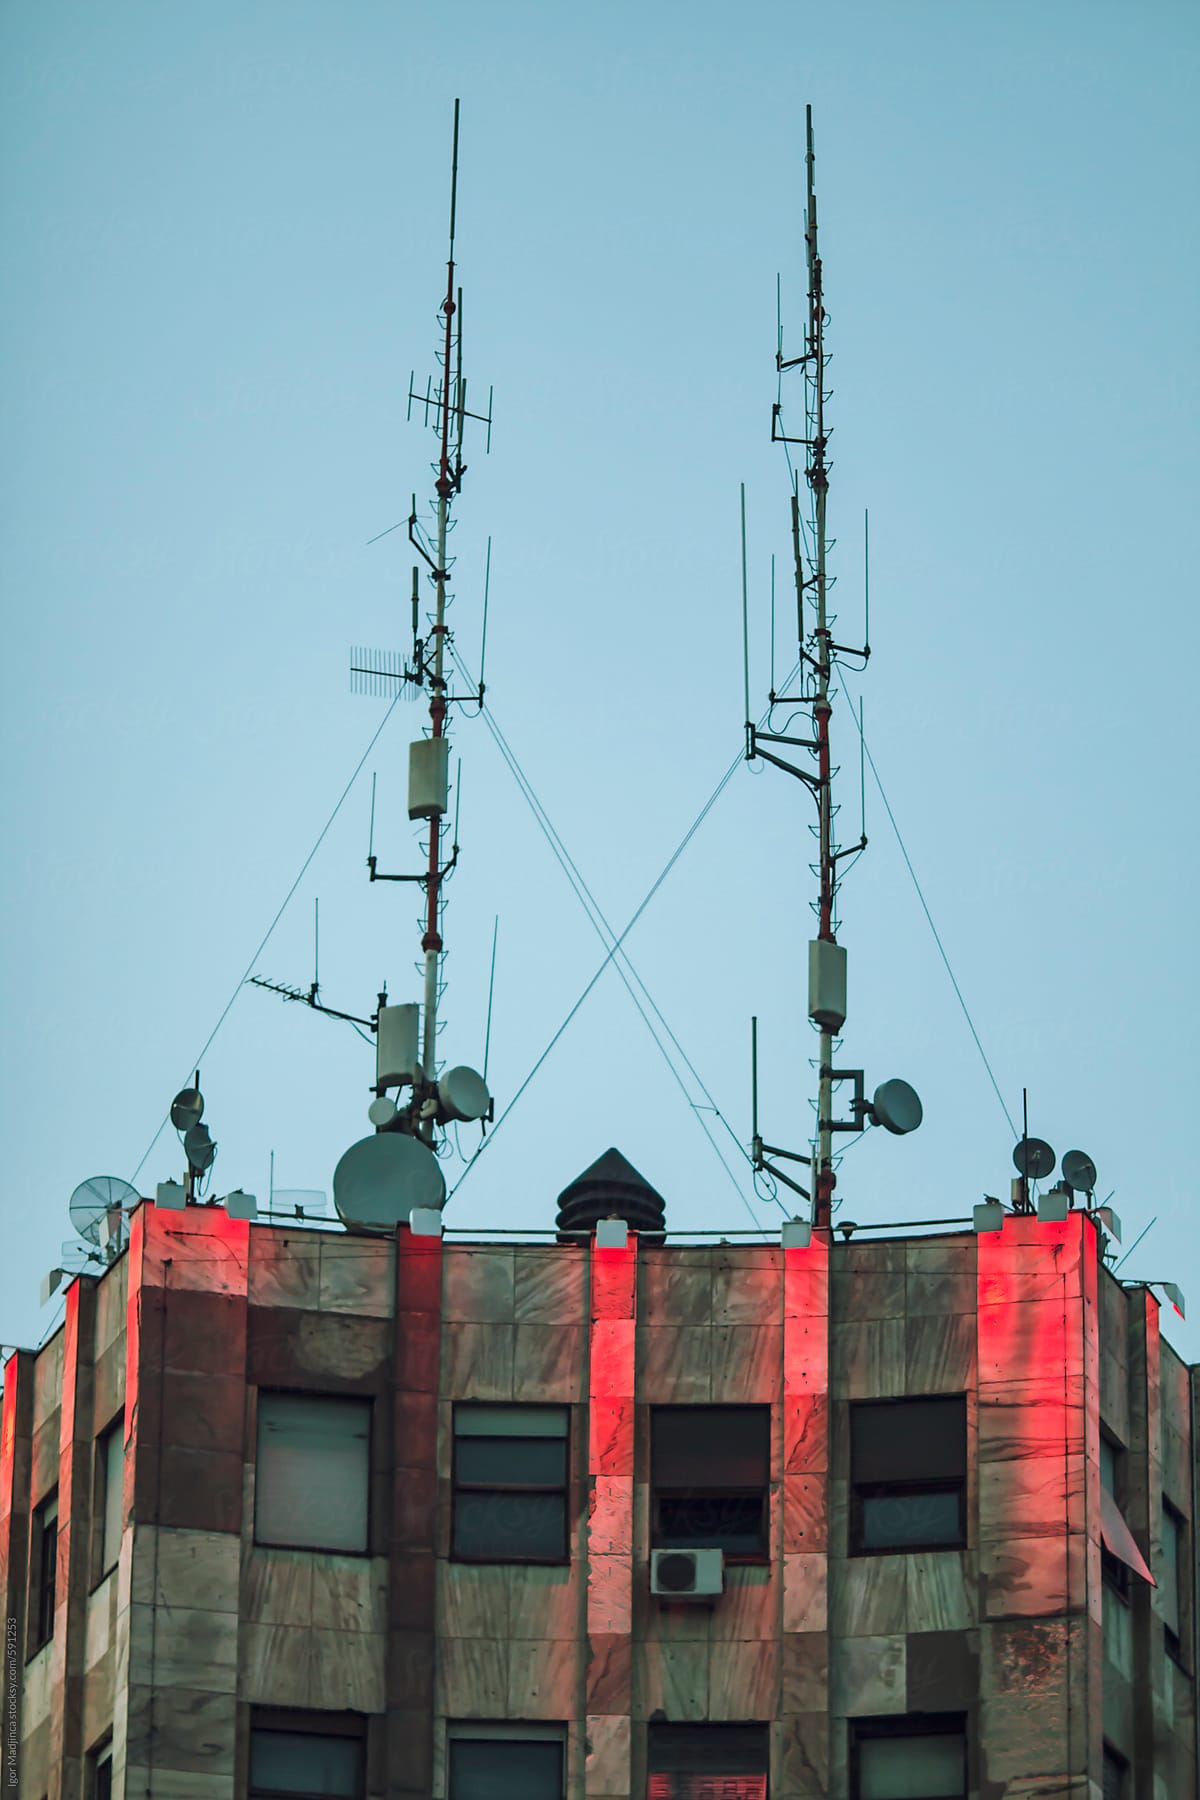 transmitter and antenna on top of the building, twilight